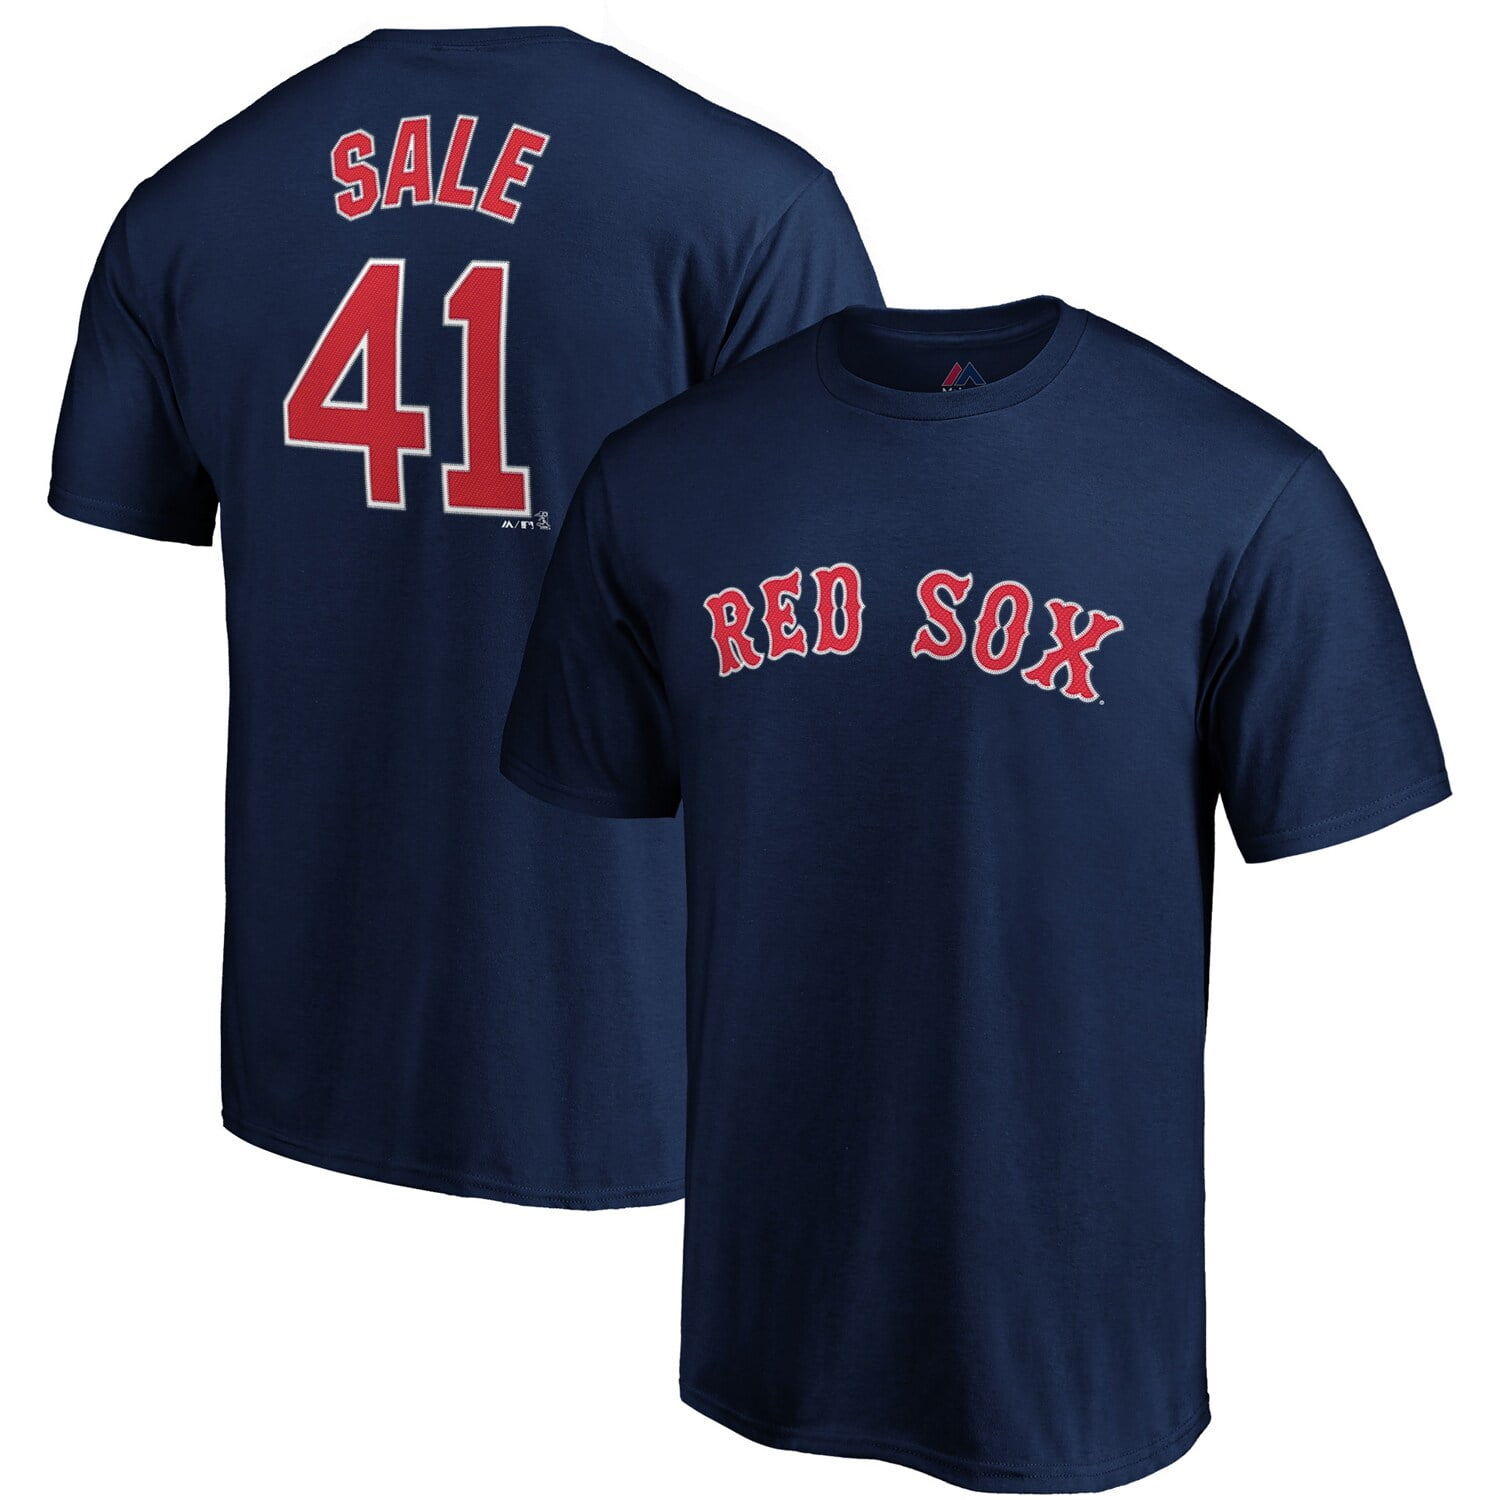 Chris Sale Boston Red Sox Majestic Official Player Name & Number T ...